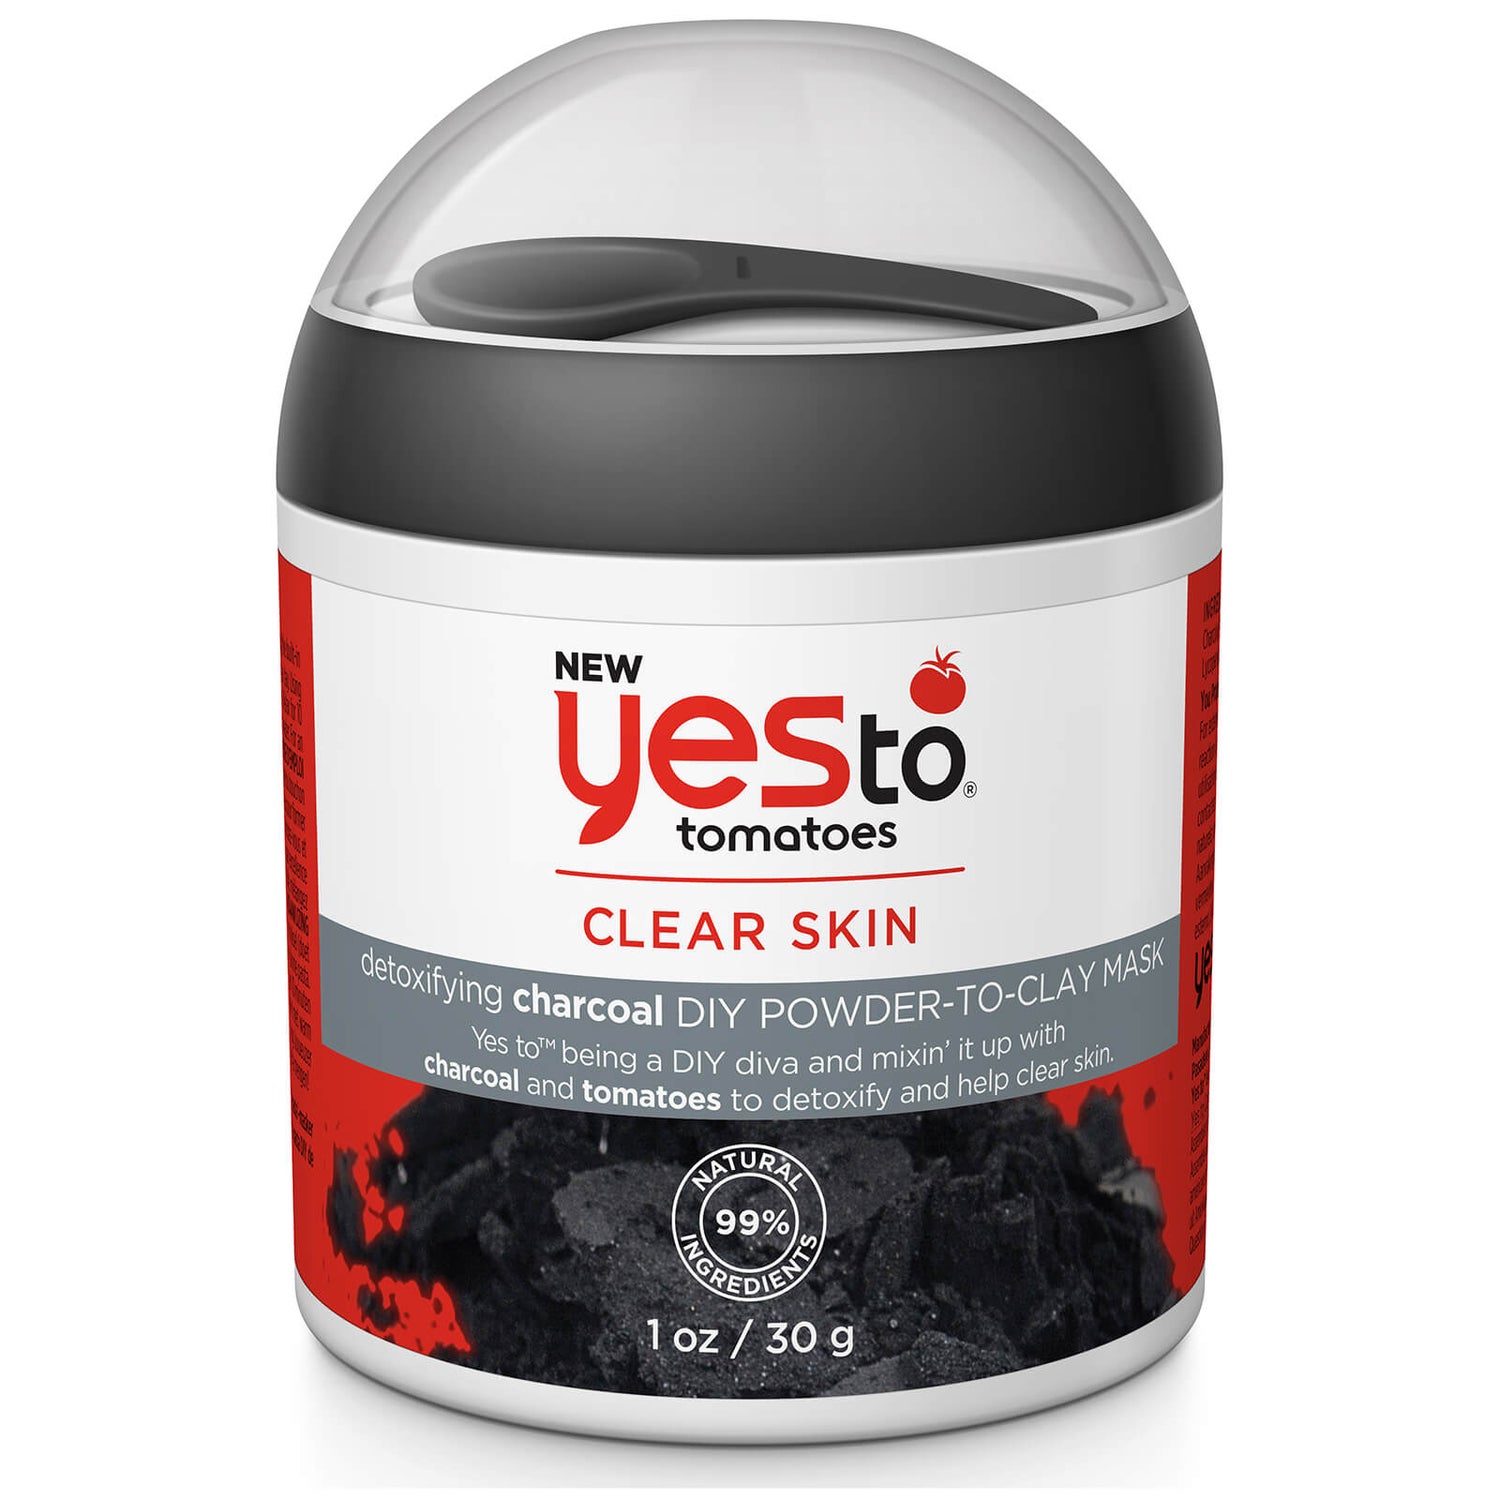 yes to Tomatoes Detoxifying Charcoal DIY Powder to Clay Mask 30g